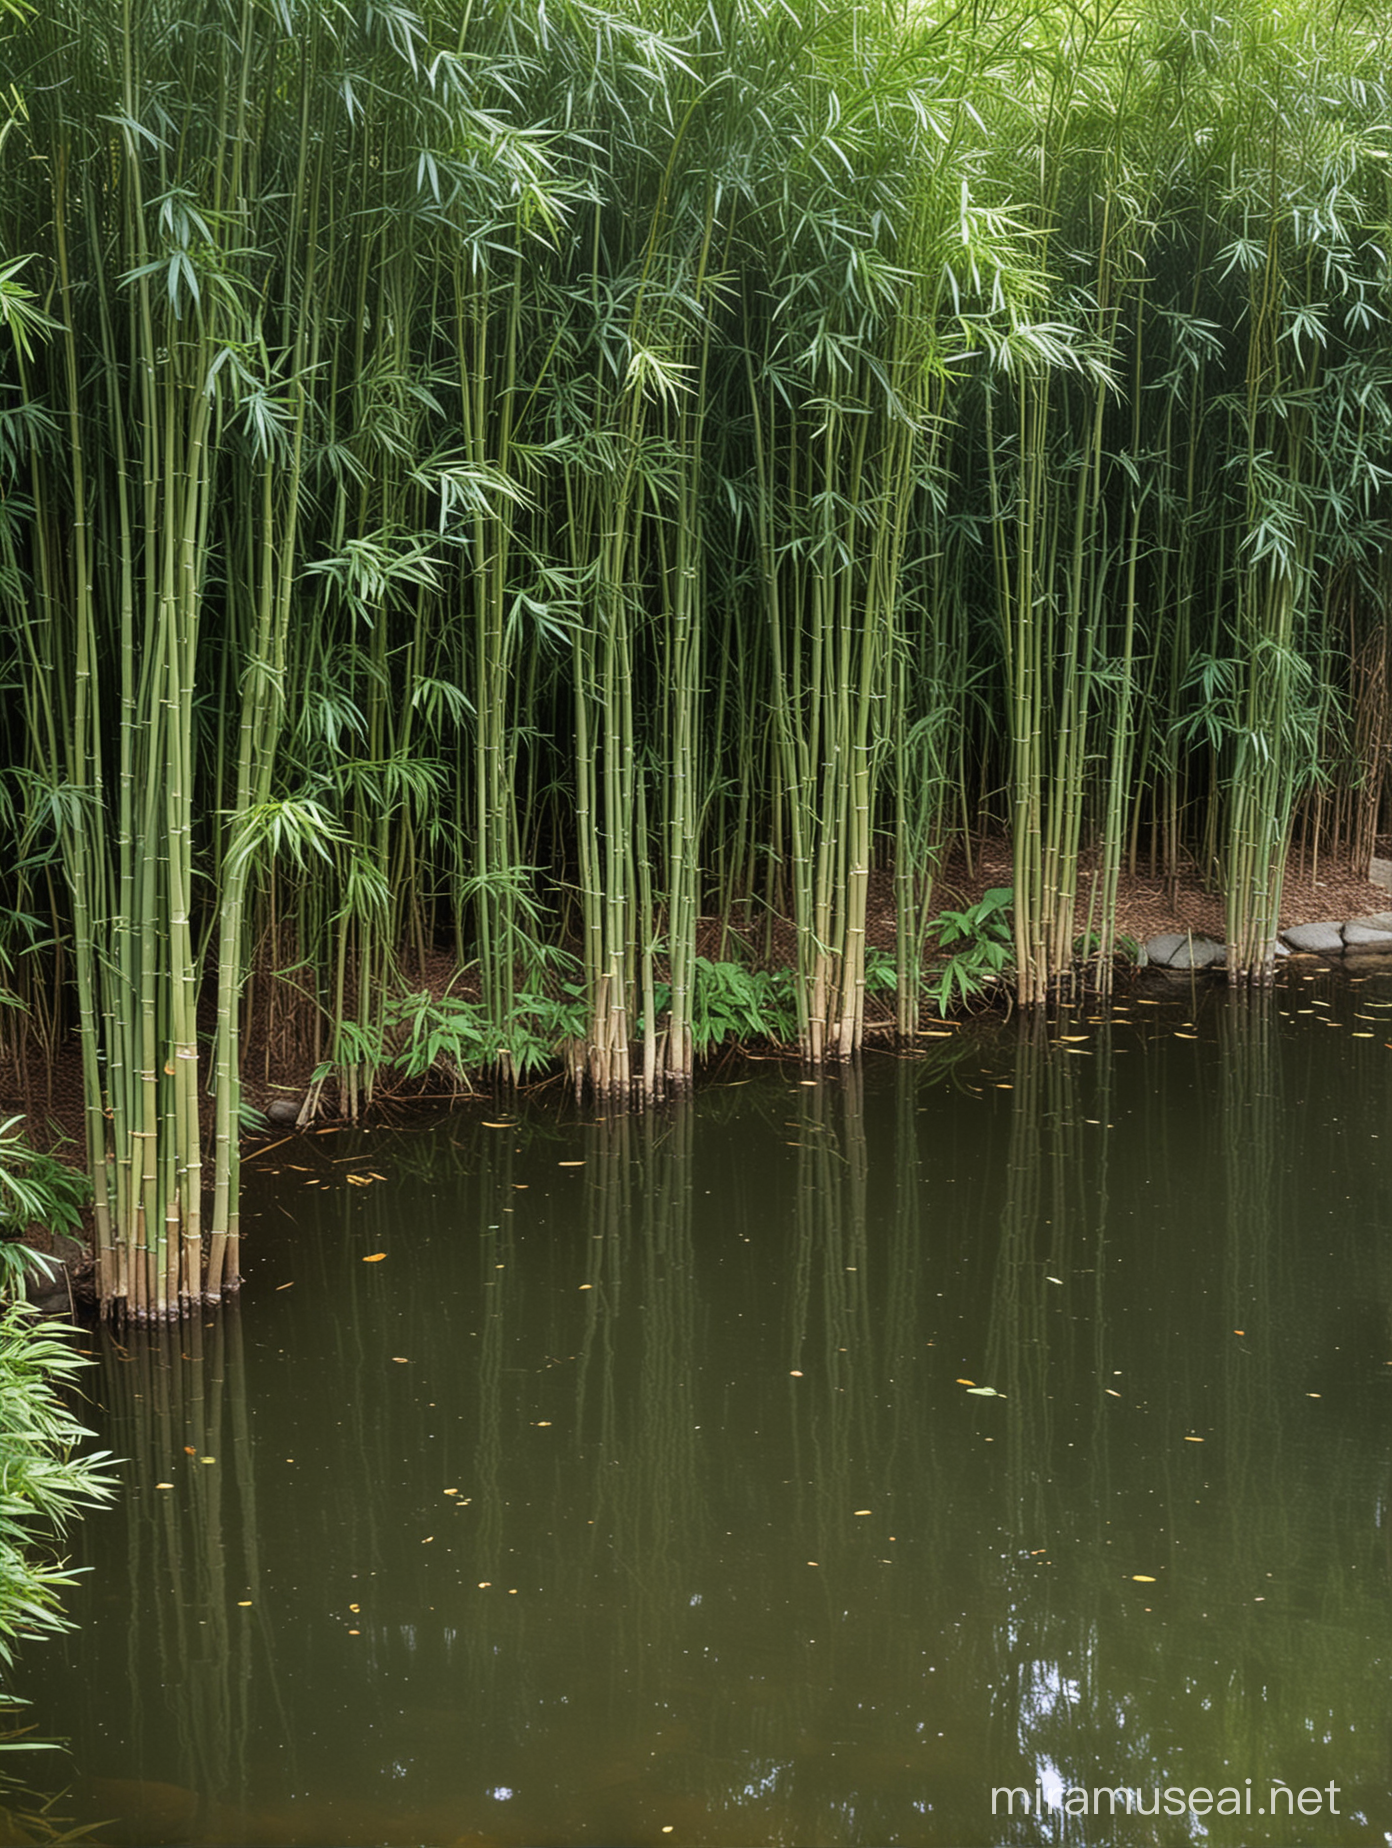 short and small clumps of 
bamboo overhanging a pond